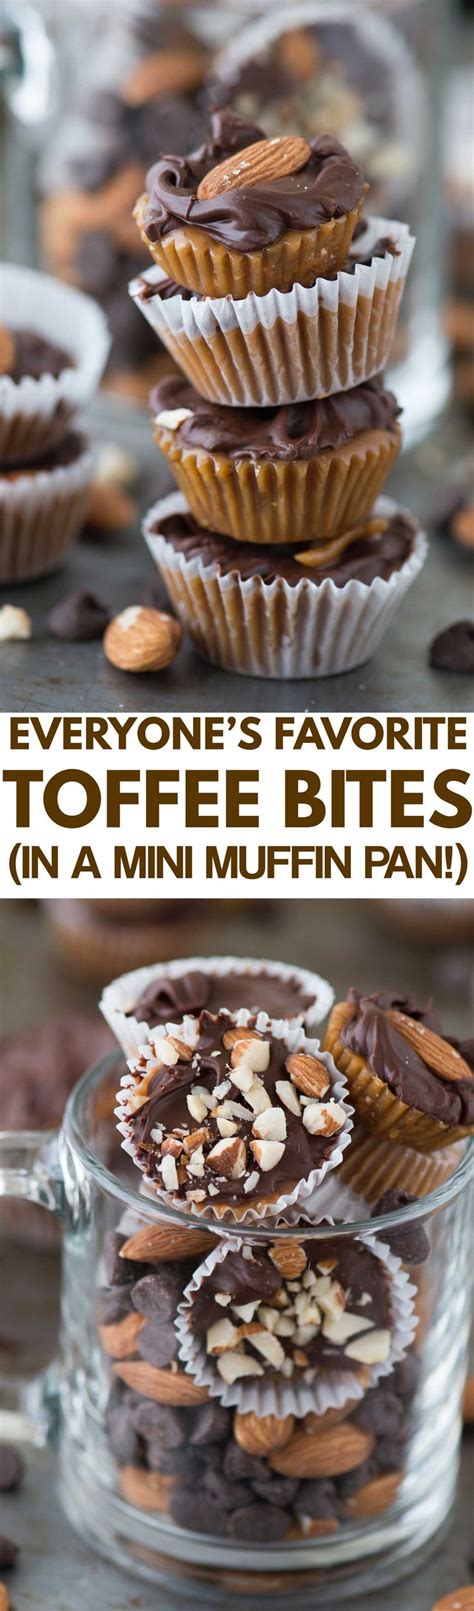 Homemade Almond Toffee Bites Made In A Mini Muffin Pan Which Is Genius